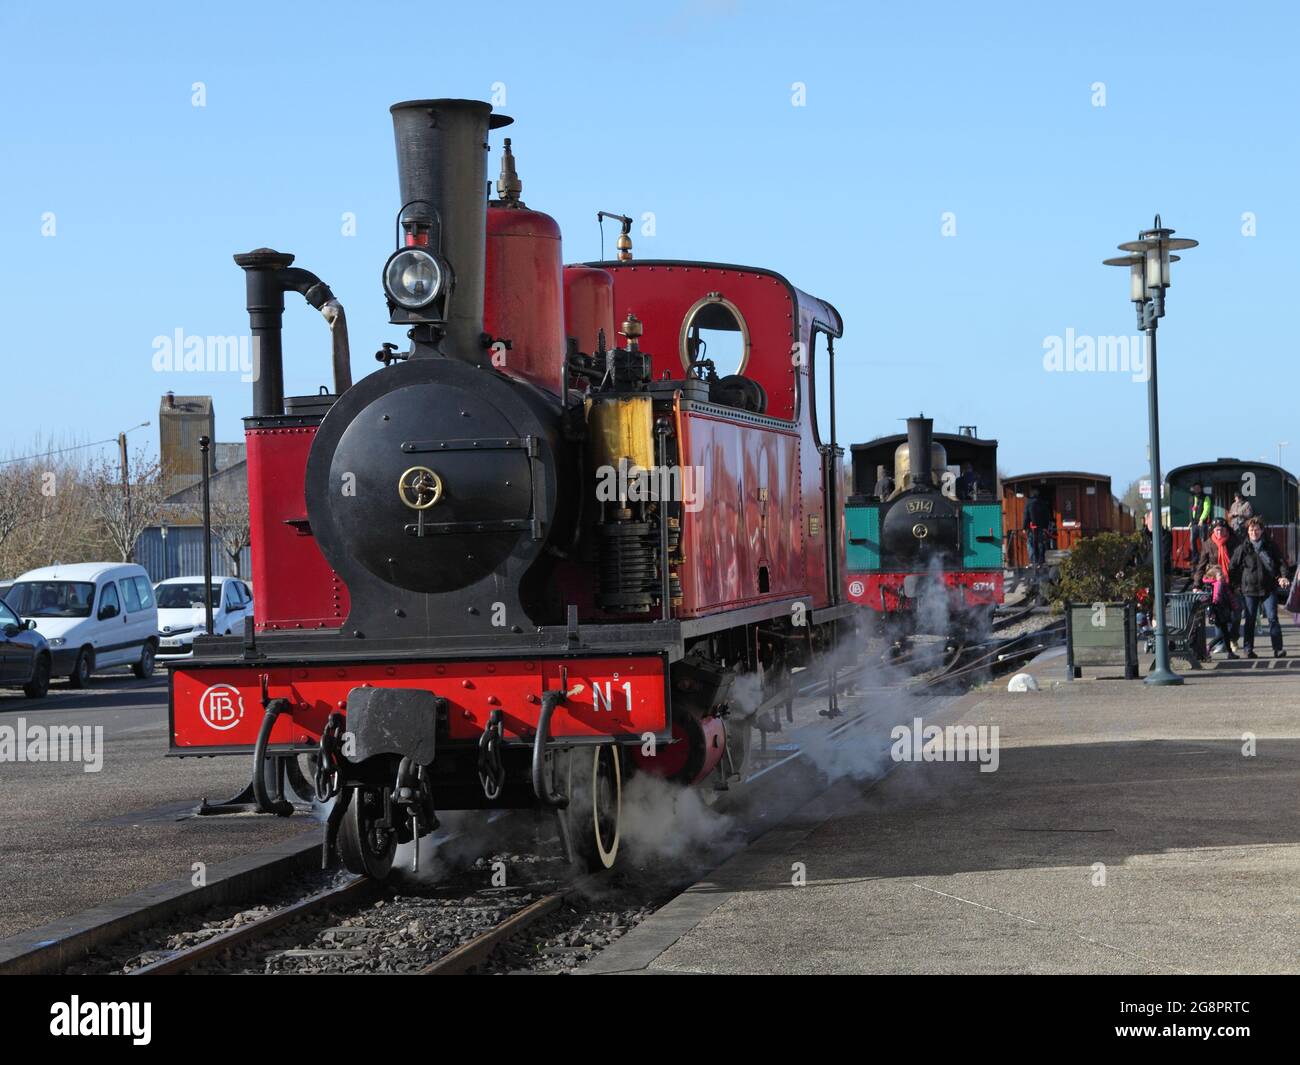 St Valery-sur-Somme Steam train at Noyelles-sur-Mer, Haute Somme, Picardy, France Stock Photo